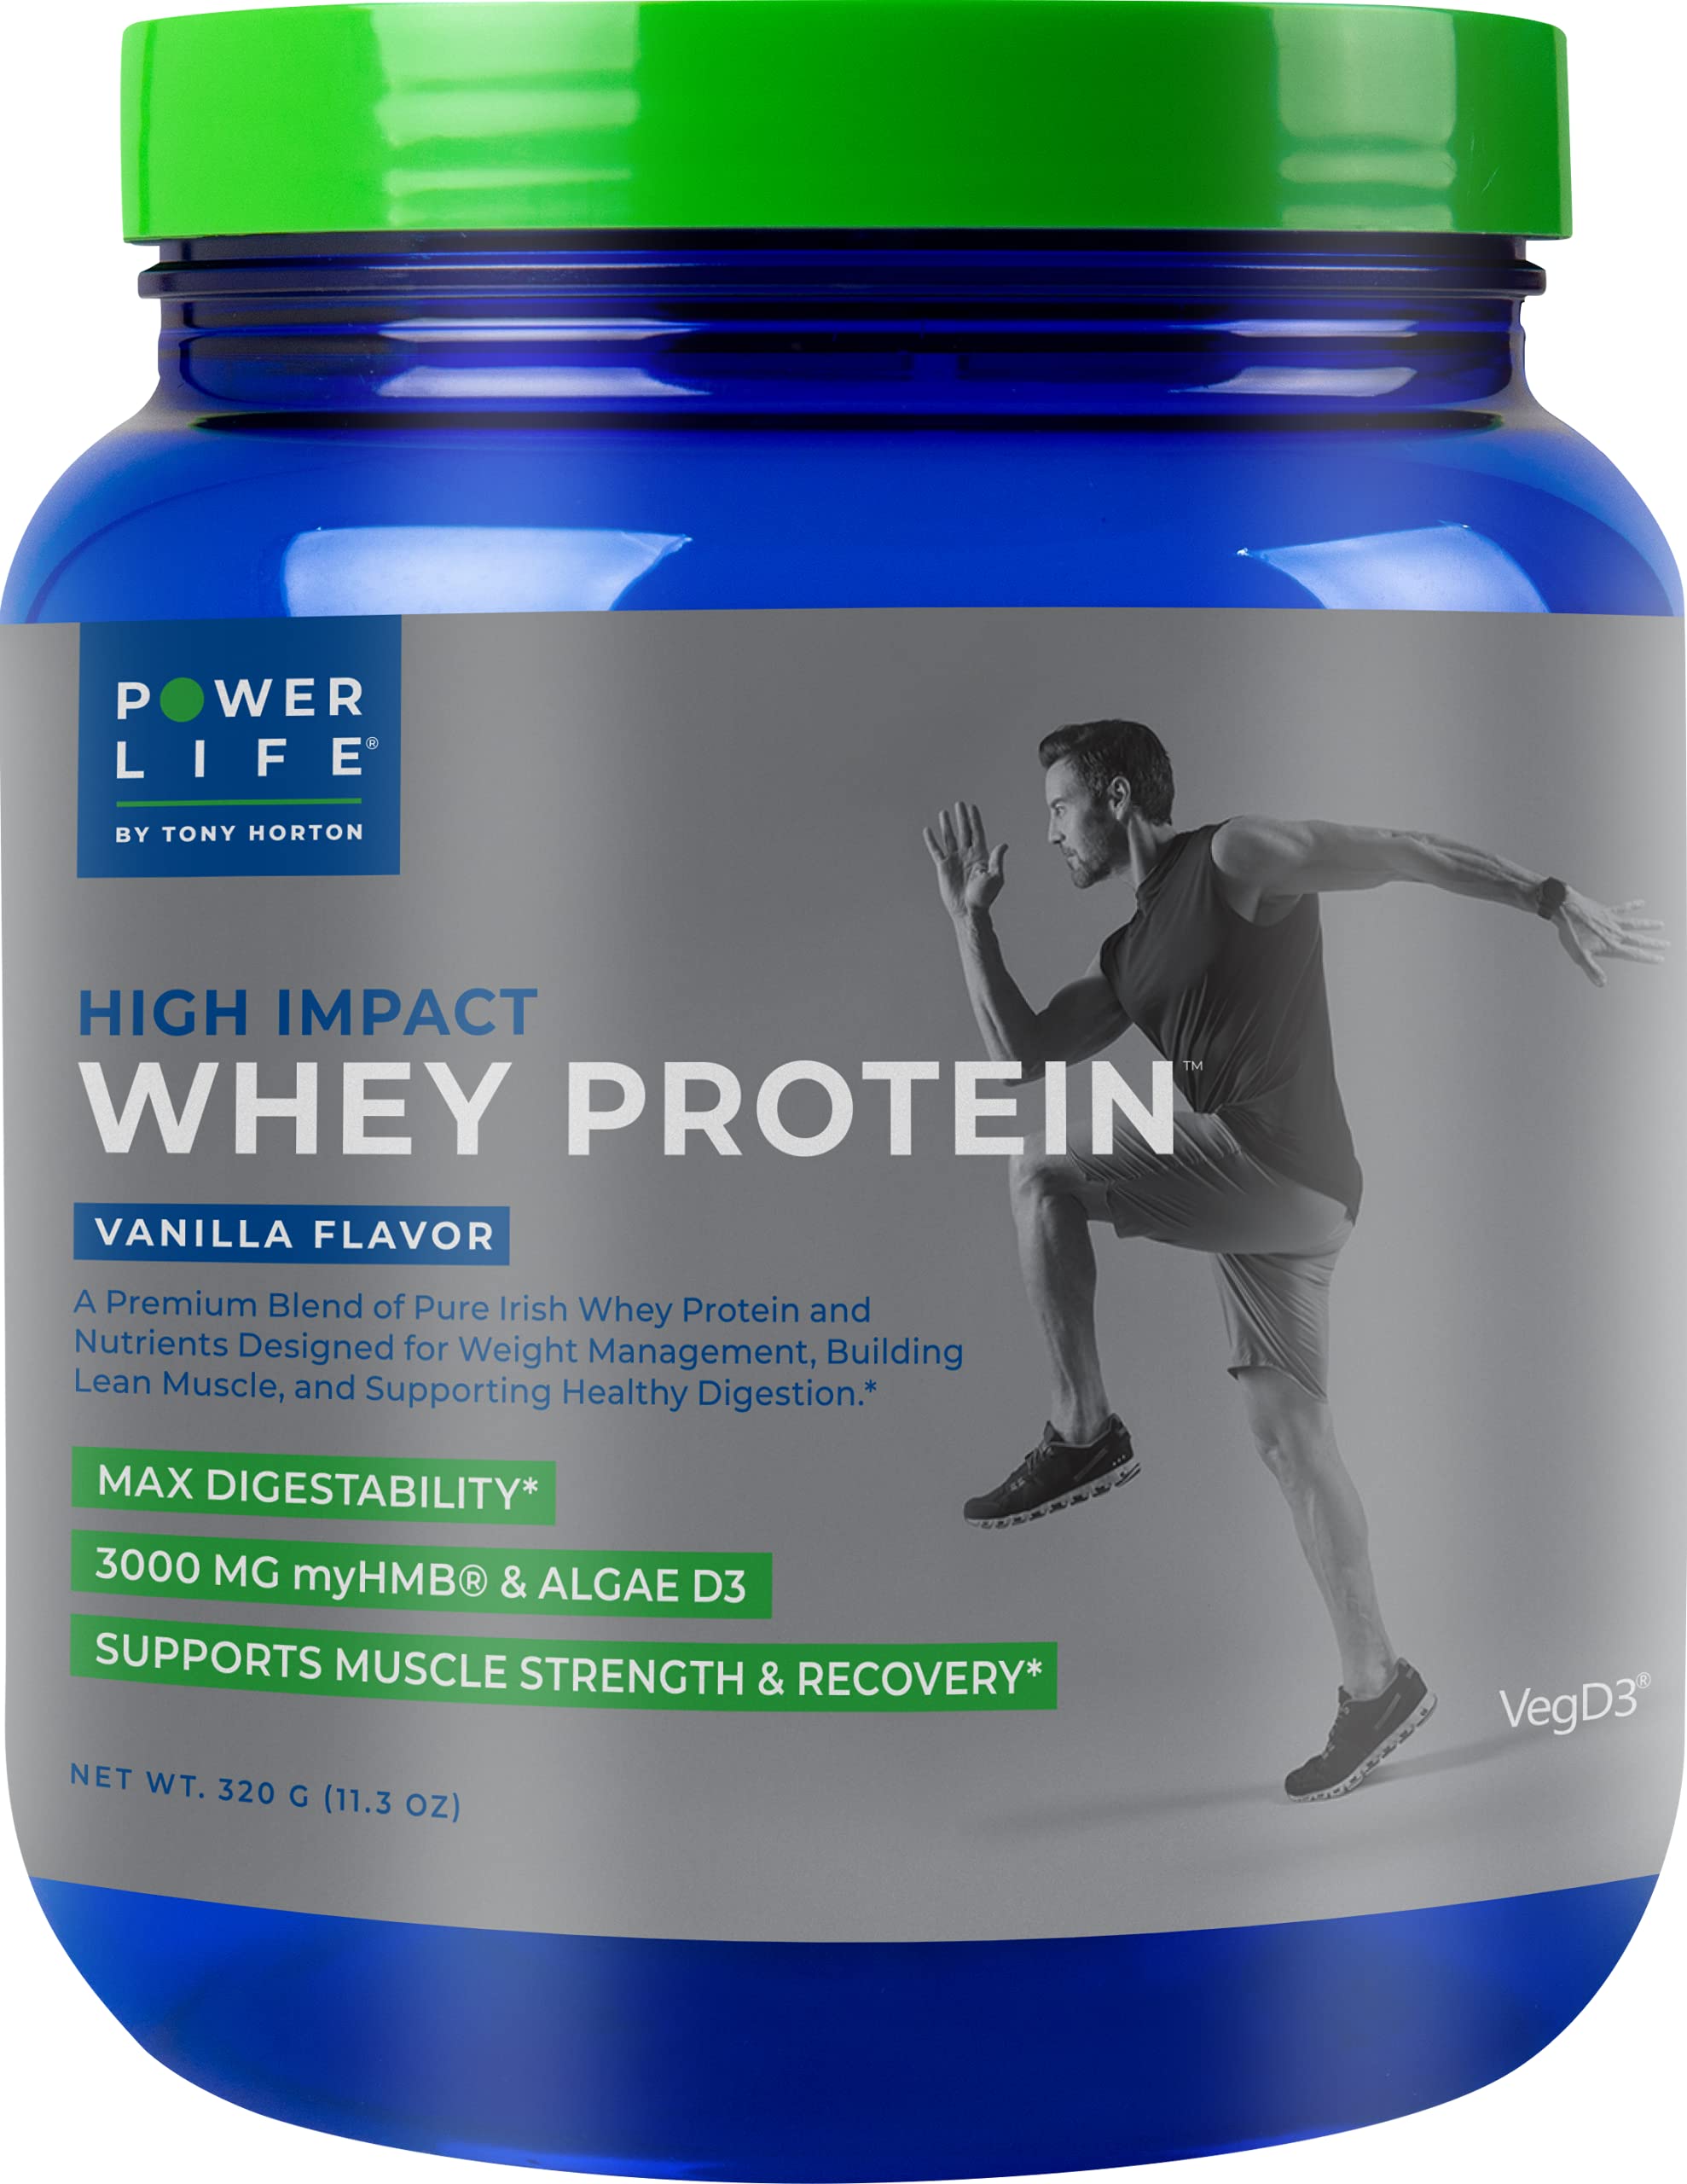 Tony Horton PowerLife High Impact Grass Fed Whey Protein with 3000 MG of HMB, No Sugar Added, Non-GMO, Hormone and Antibiotic Free 15 Servings (Van...